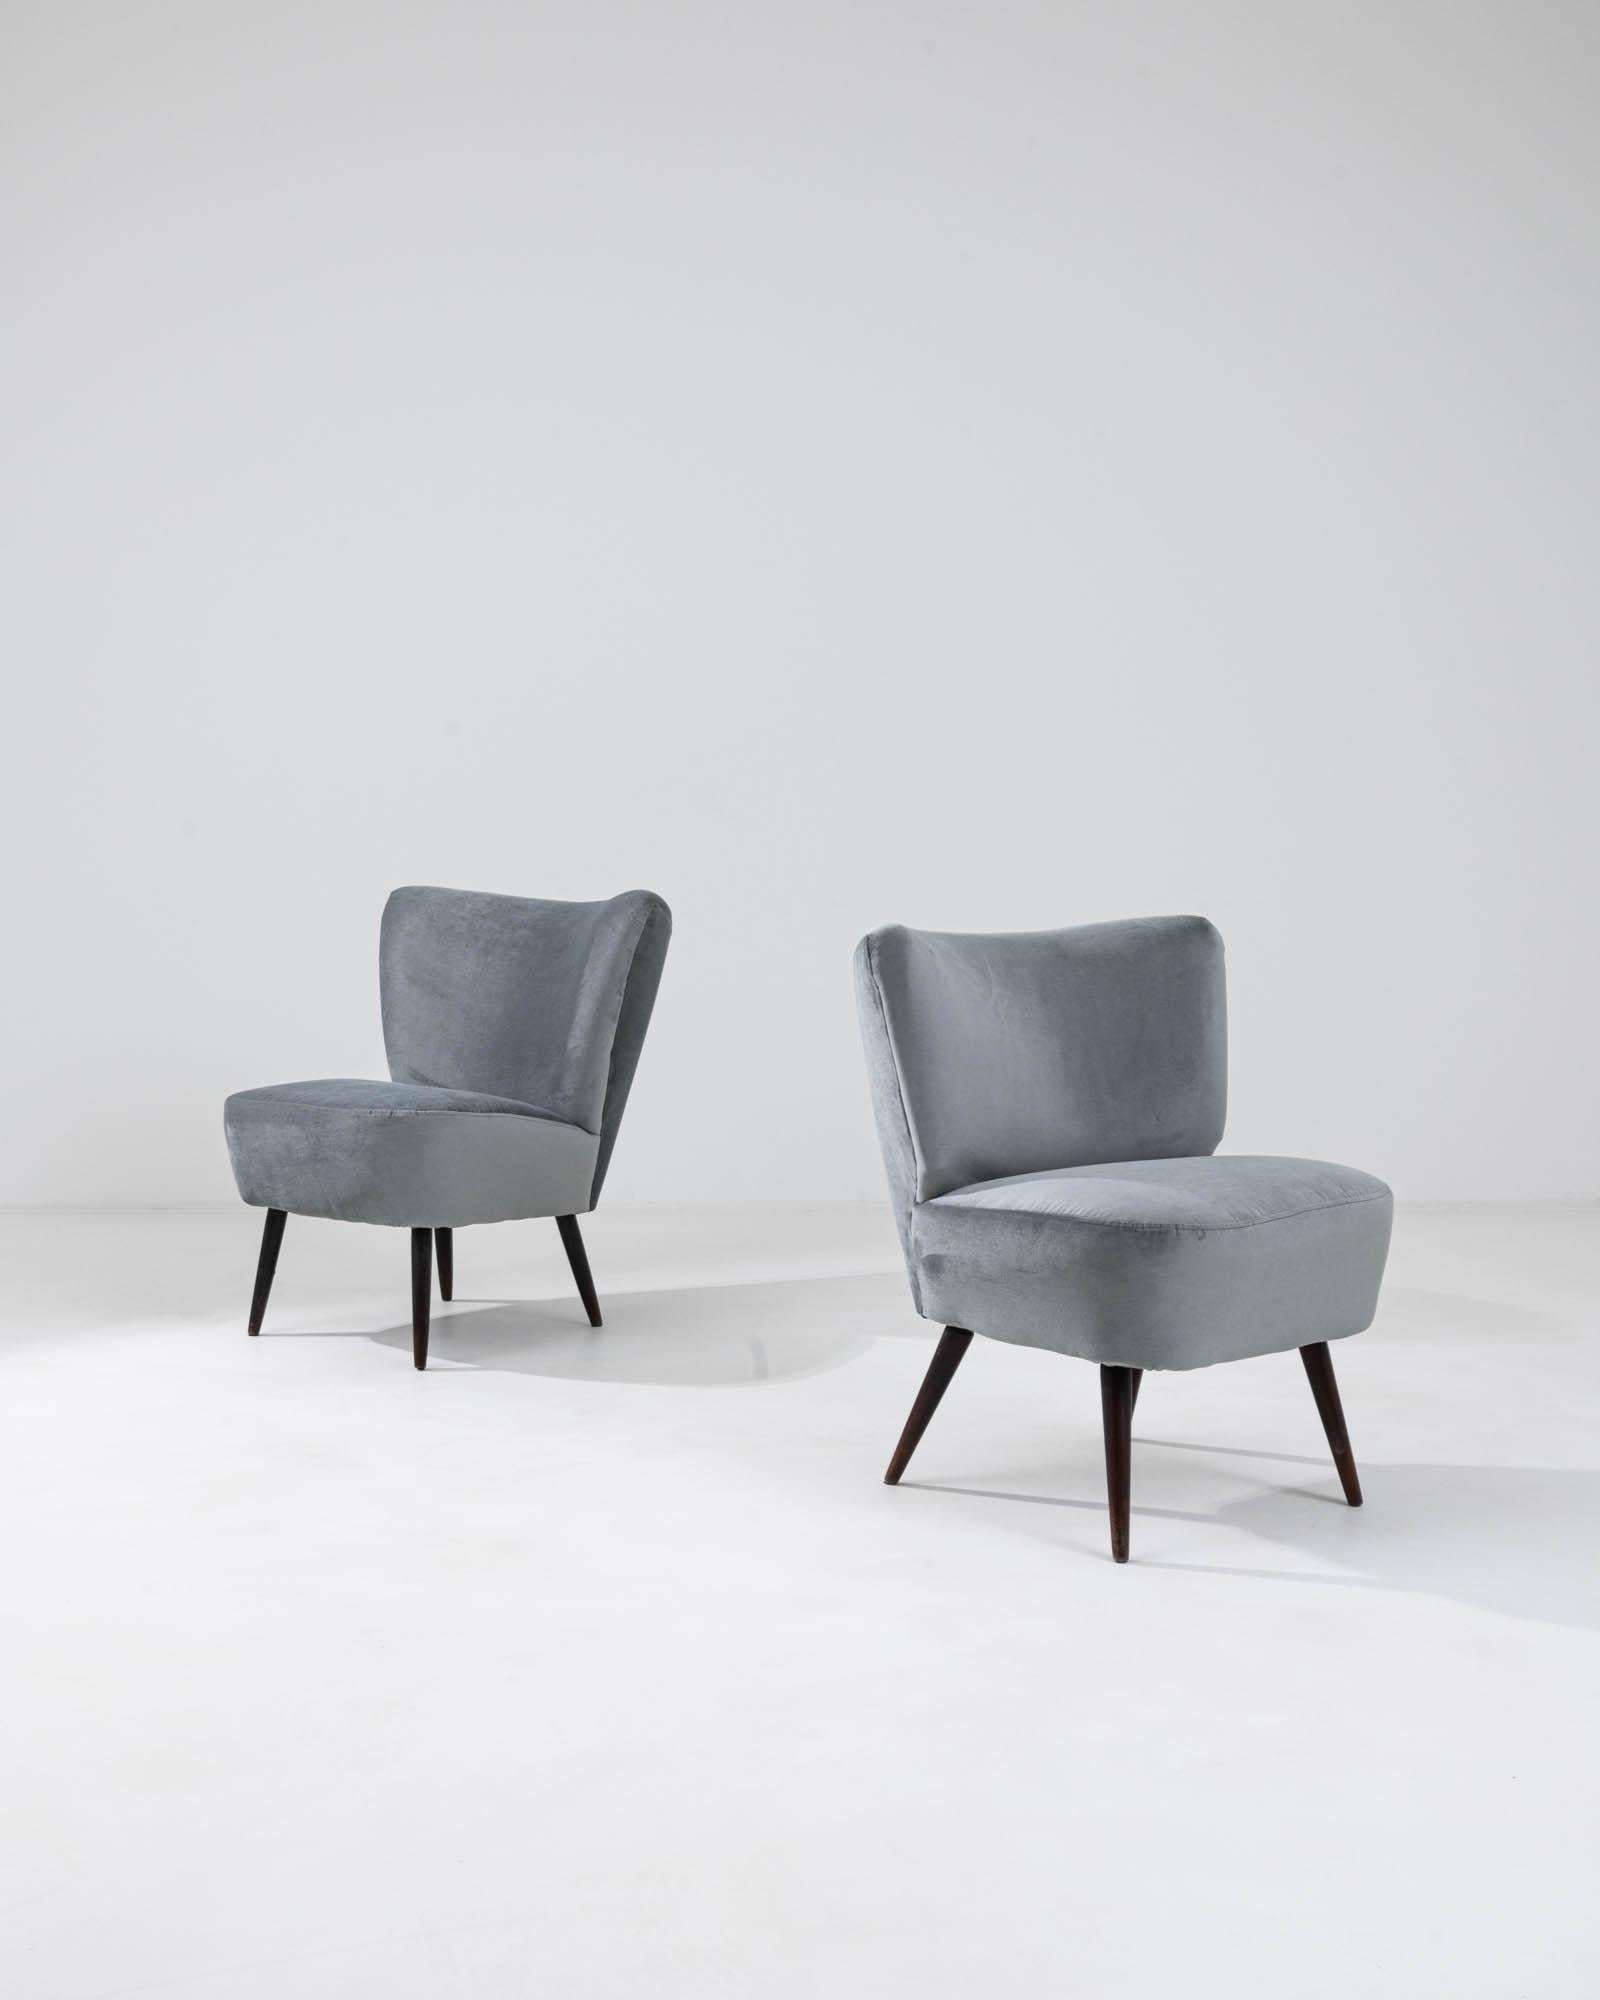 European 20th Century Danish Upholstered Armchairs, a Pair For Sale